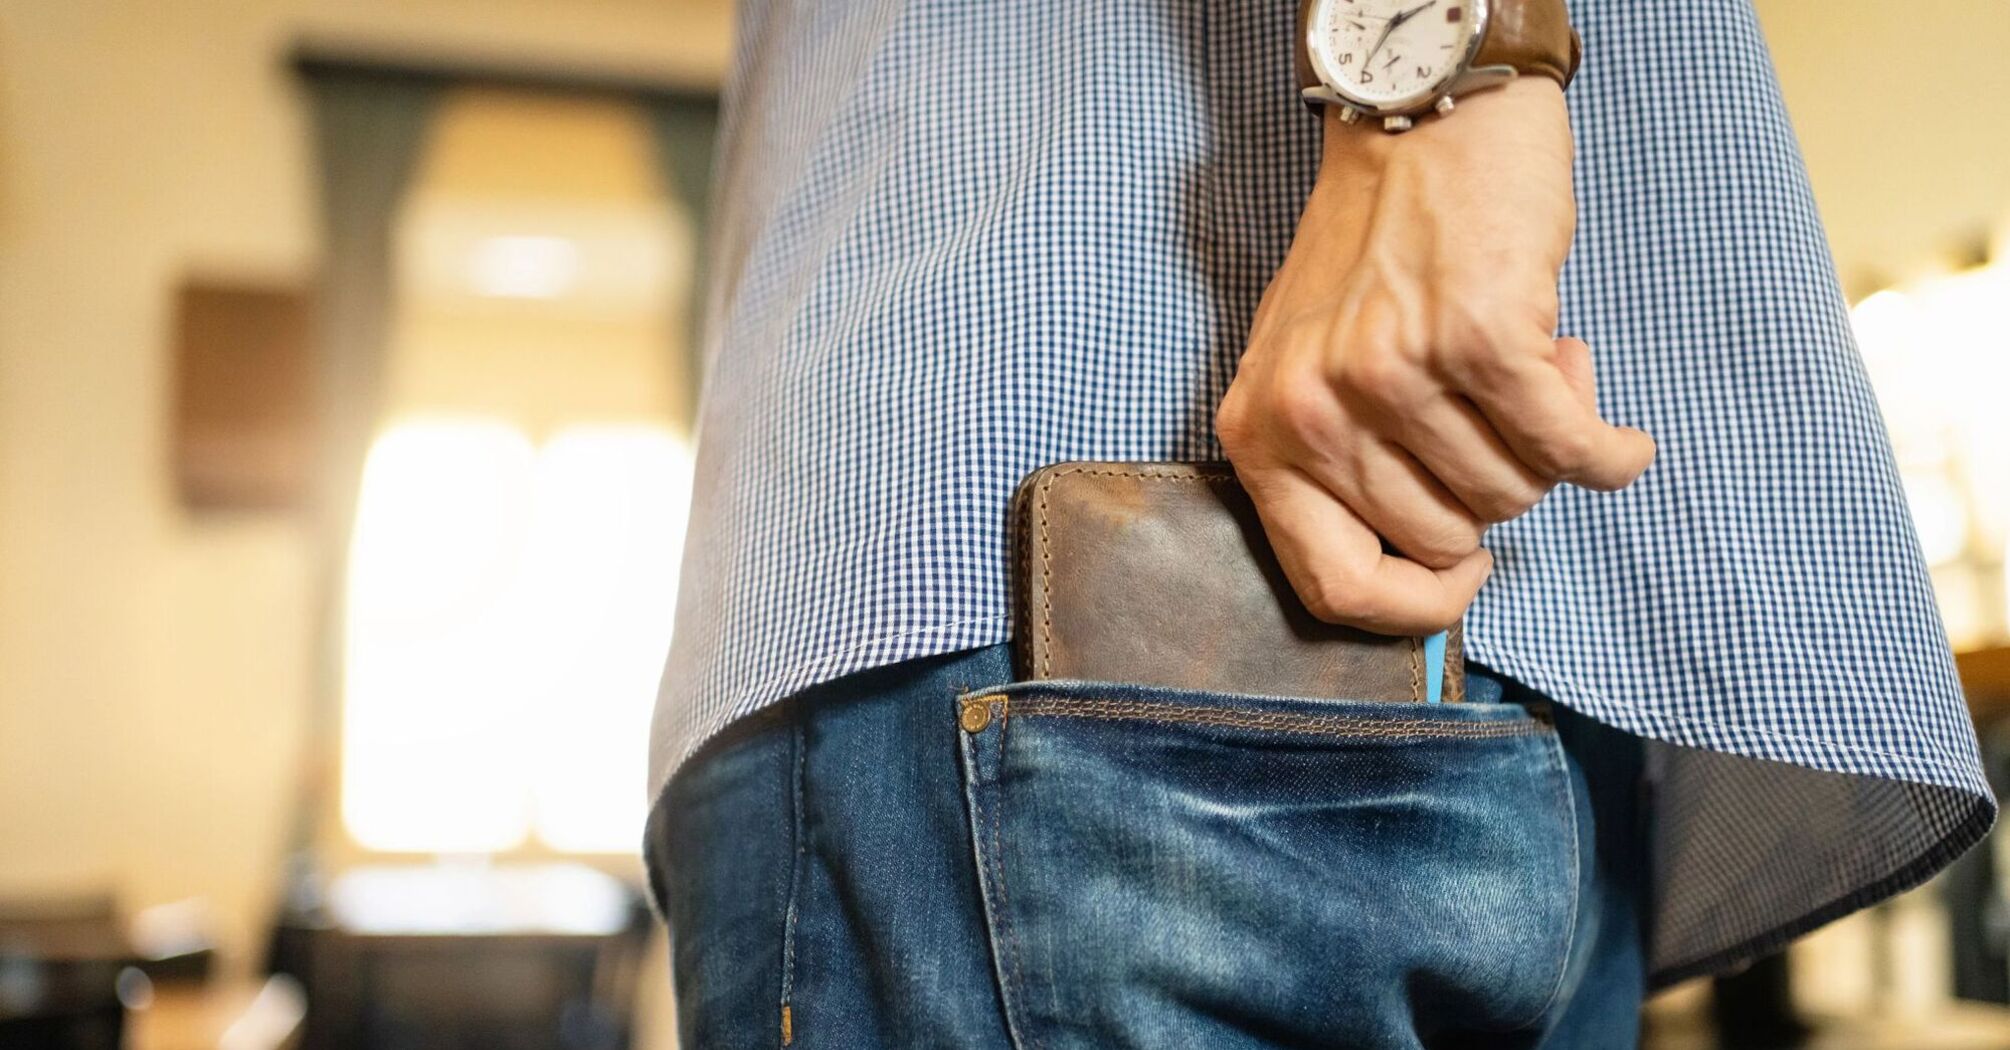 Why you shouldn't carry or keep money in your pocket